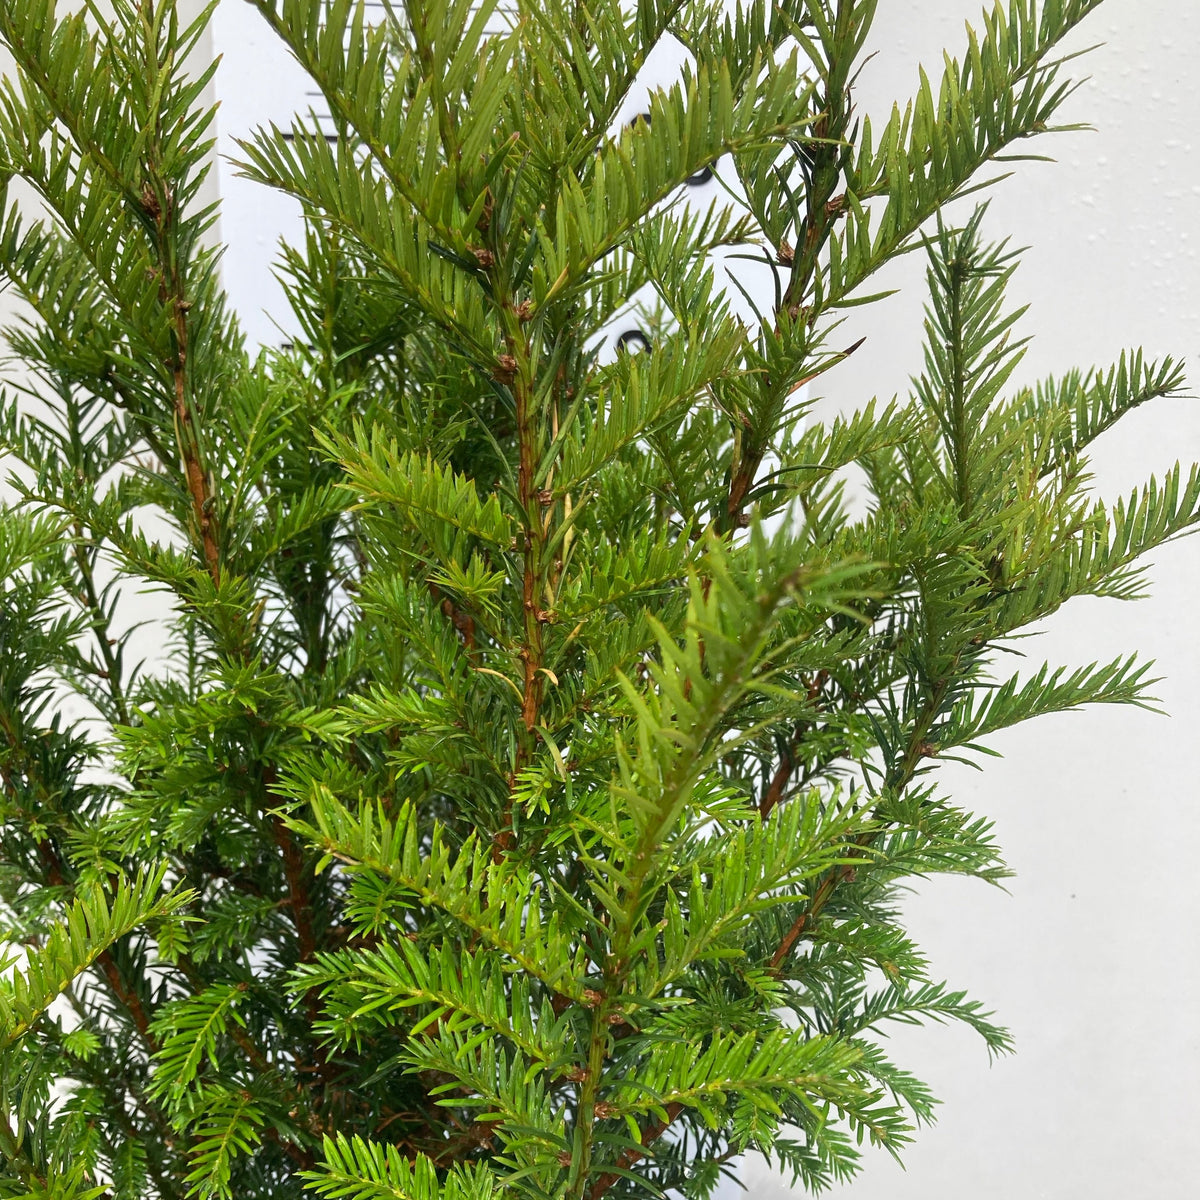 English yew hedging bare root(Taxus baccata) 60 cm 2 foot large plants.